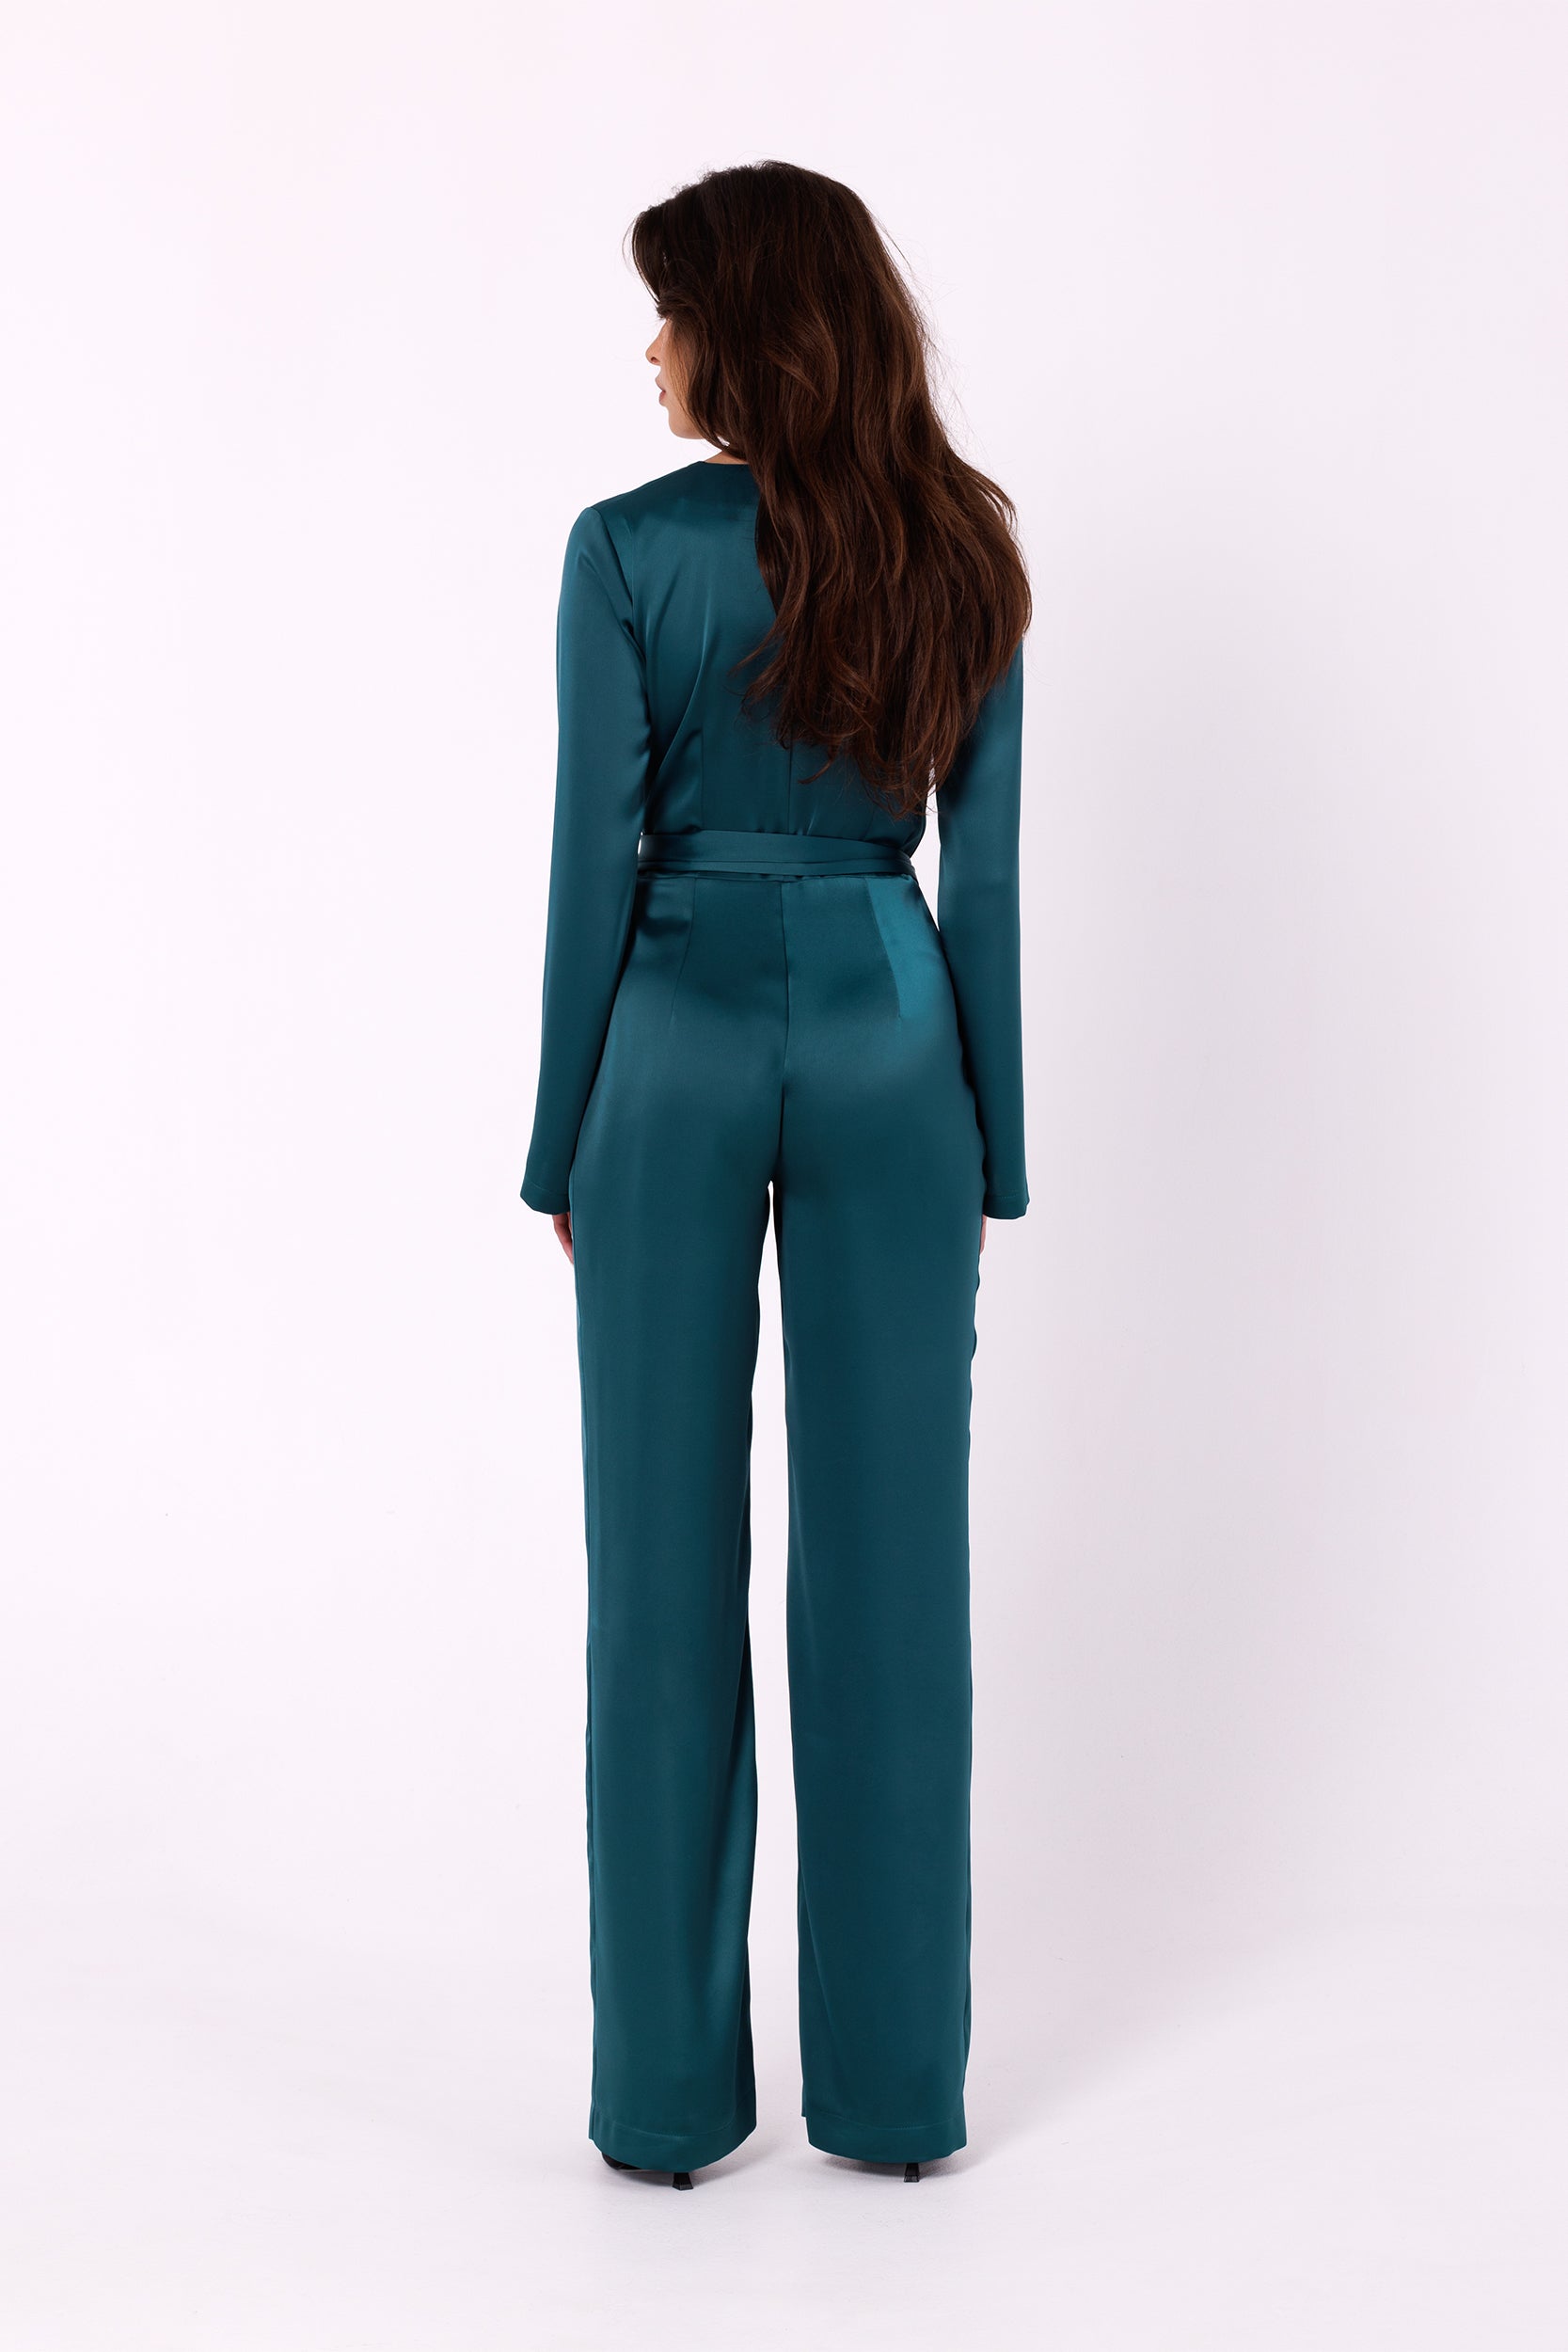 Long Sleeve Green Jumpsuit | Strictly In | Make a statement at your next event with our Long Sleeve Satin Jumpsuit. Crafted from luxurious satin, it features a V-neck, long sleeves, and a tied waist for a glamorous yet comfortable look. Perfect for the party season.